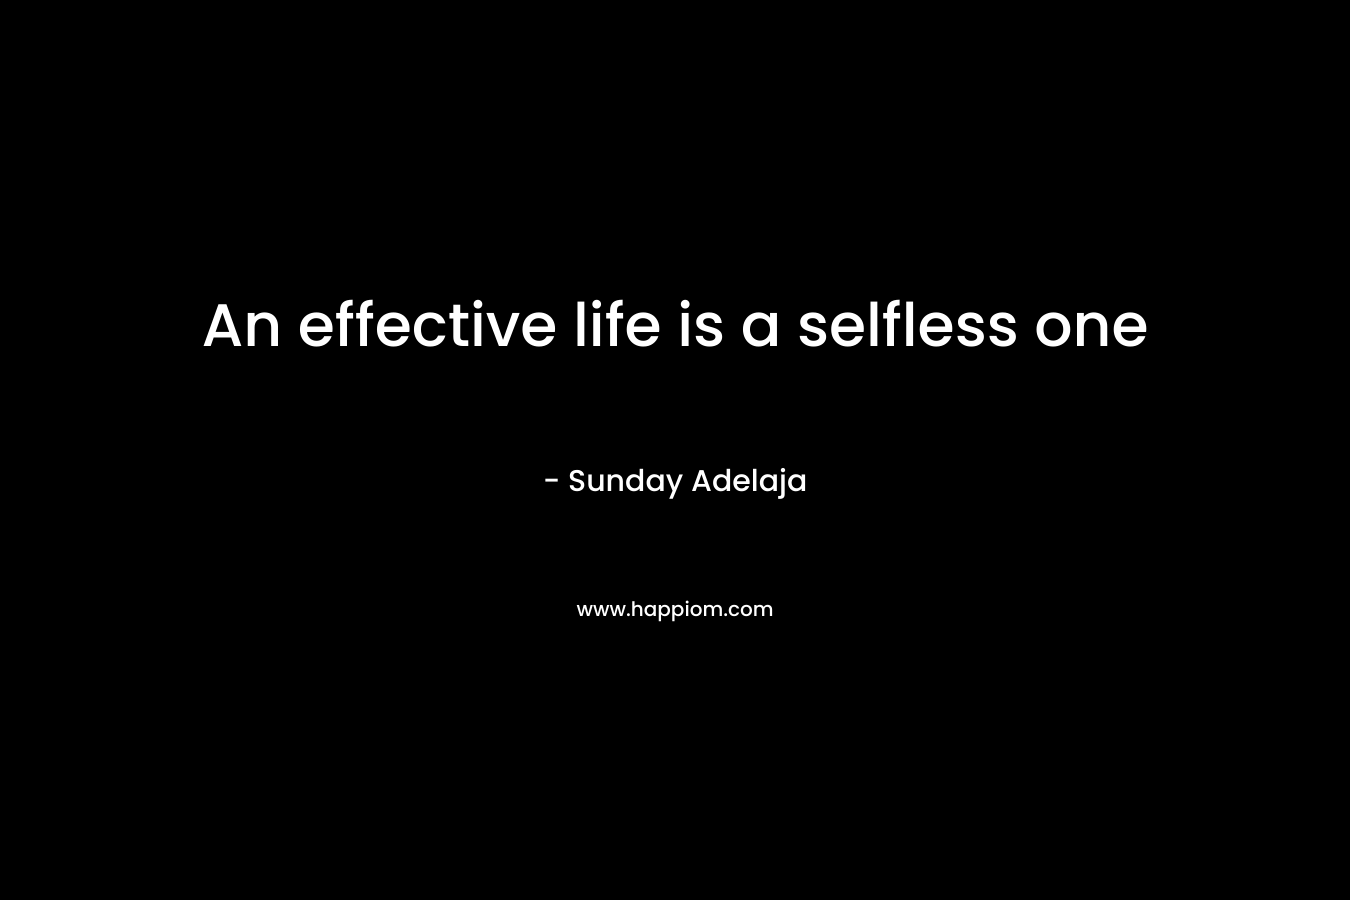 An effective life is a selfless one